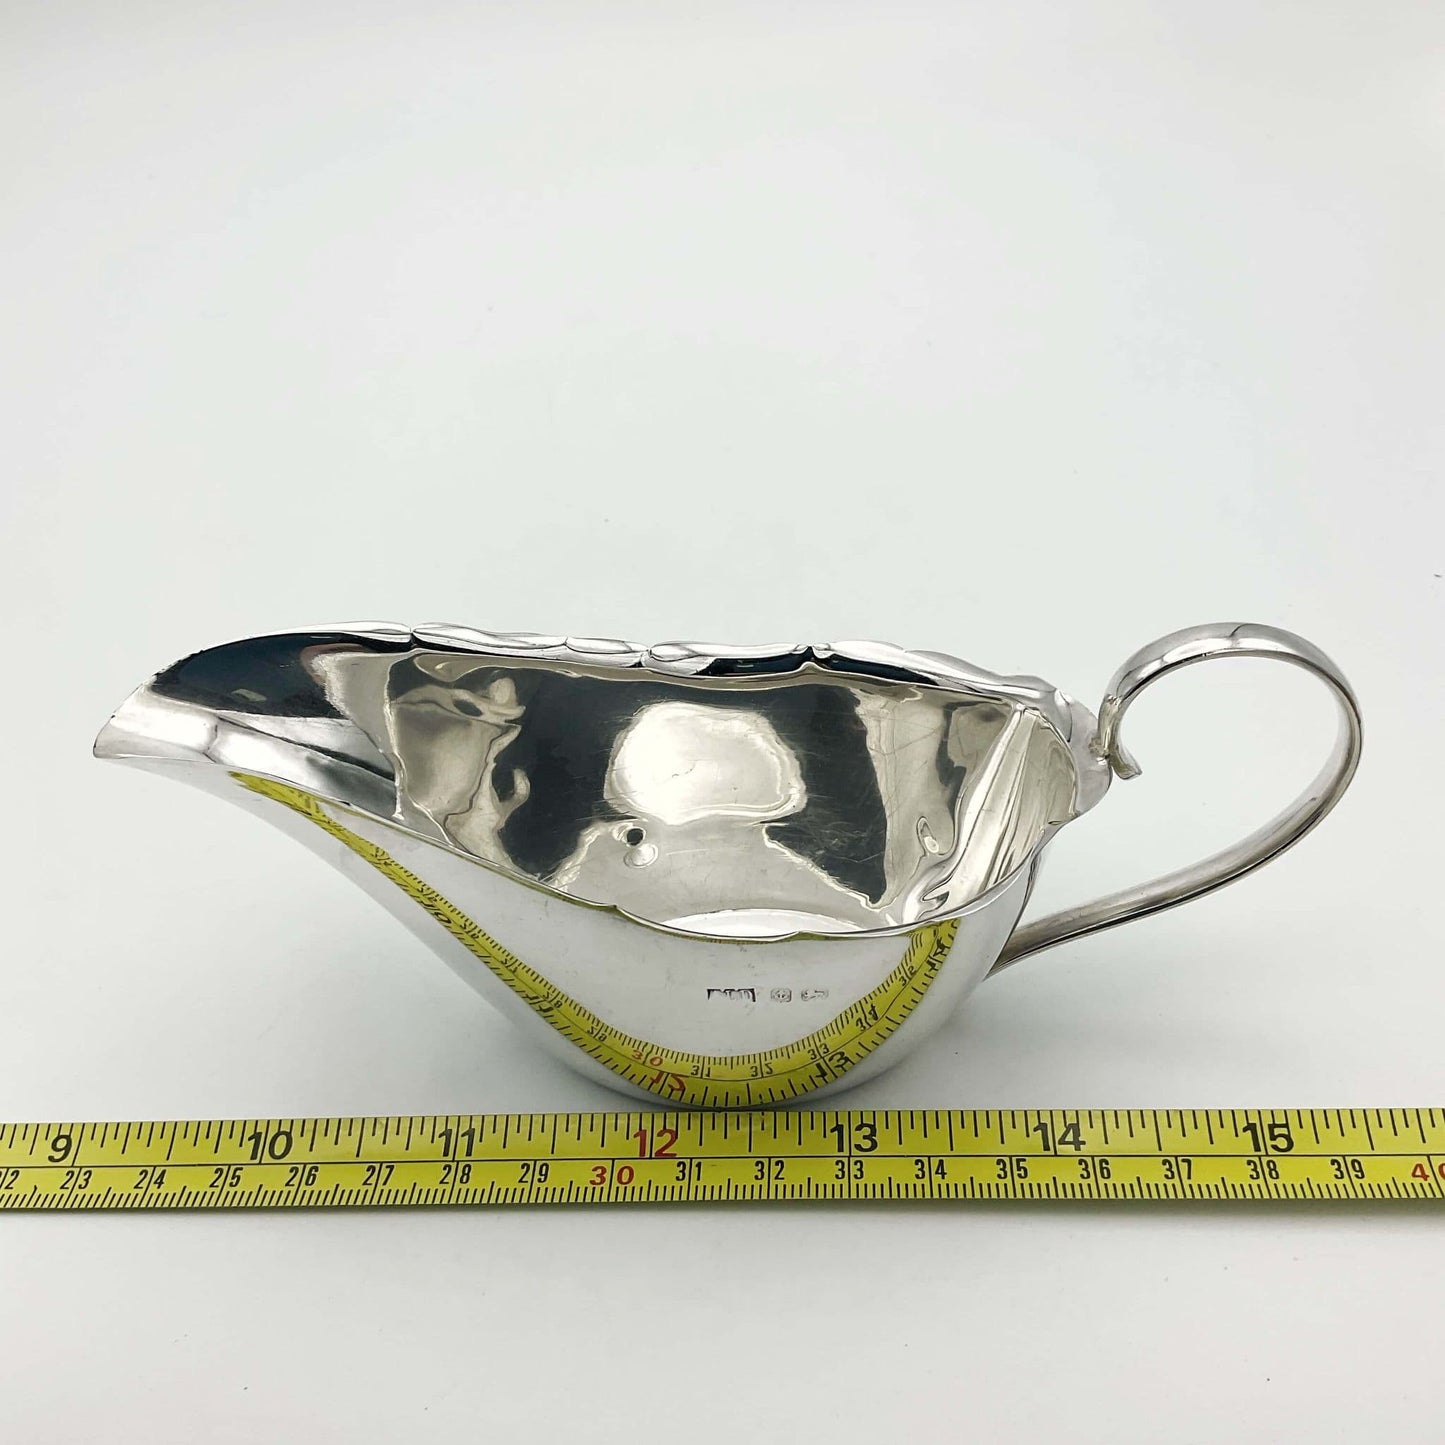 Silver sauce boat next to tape measure showing length as 15.5cm